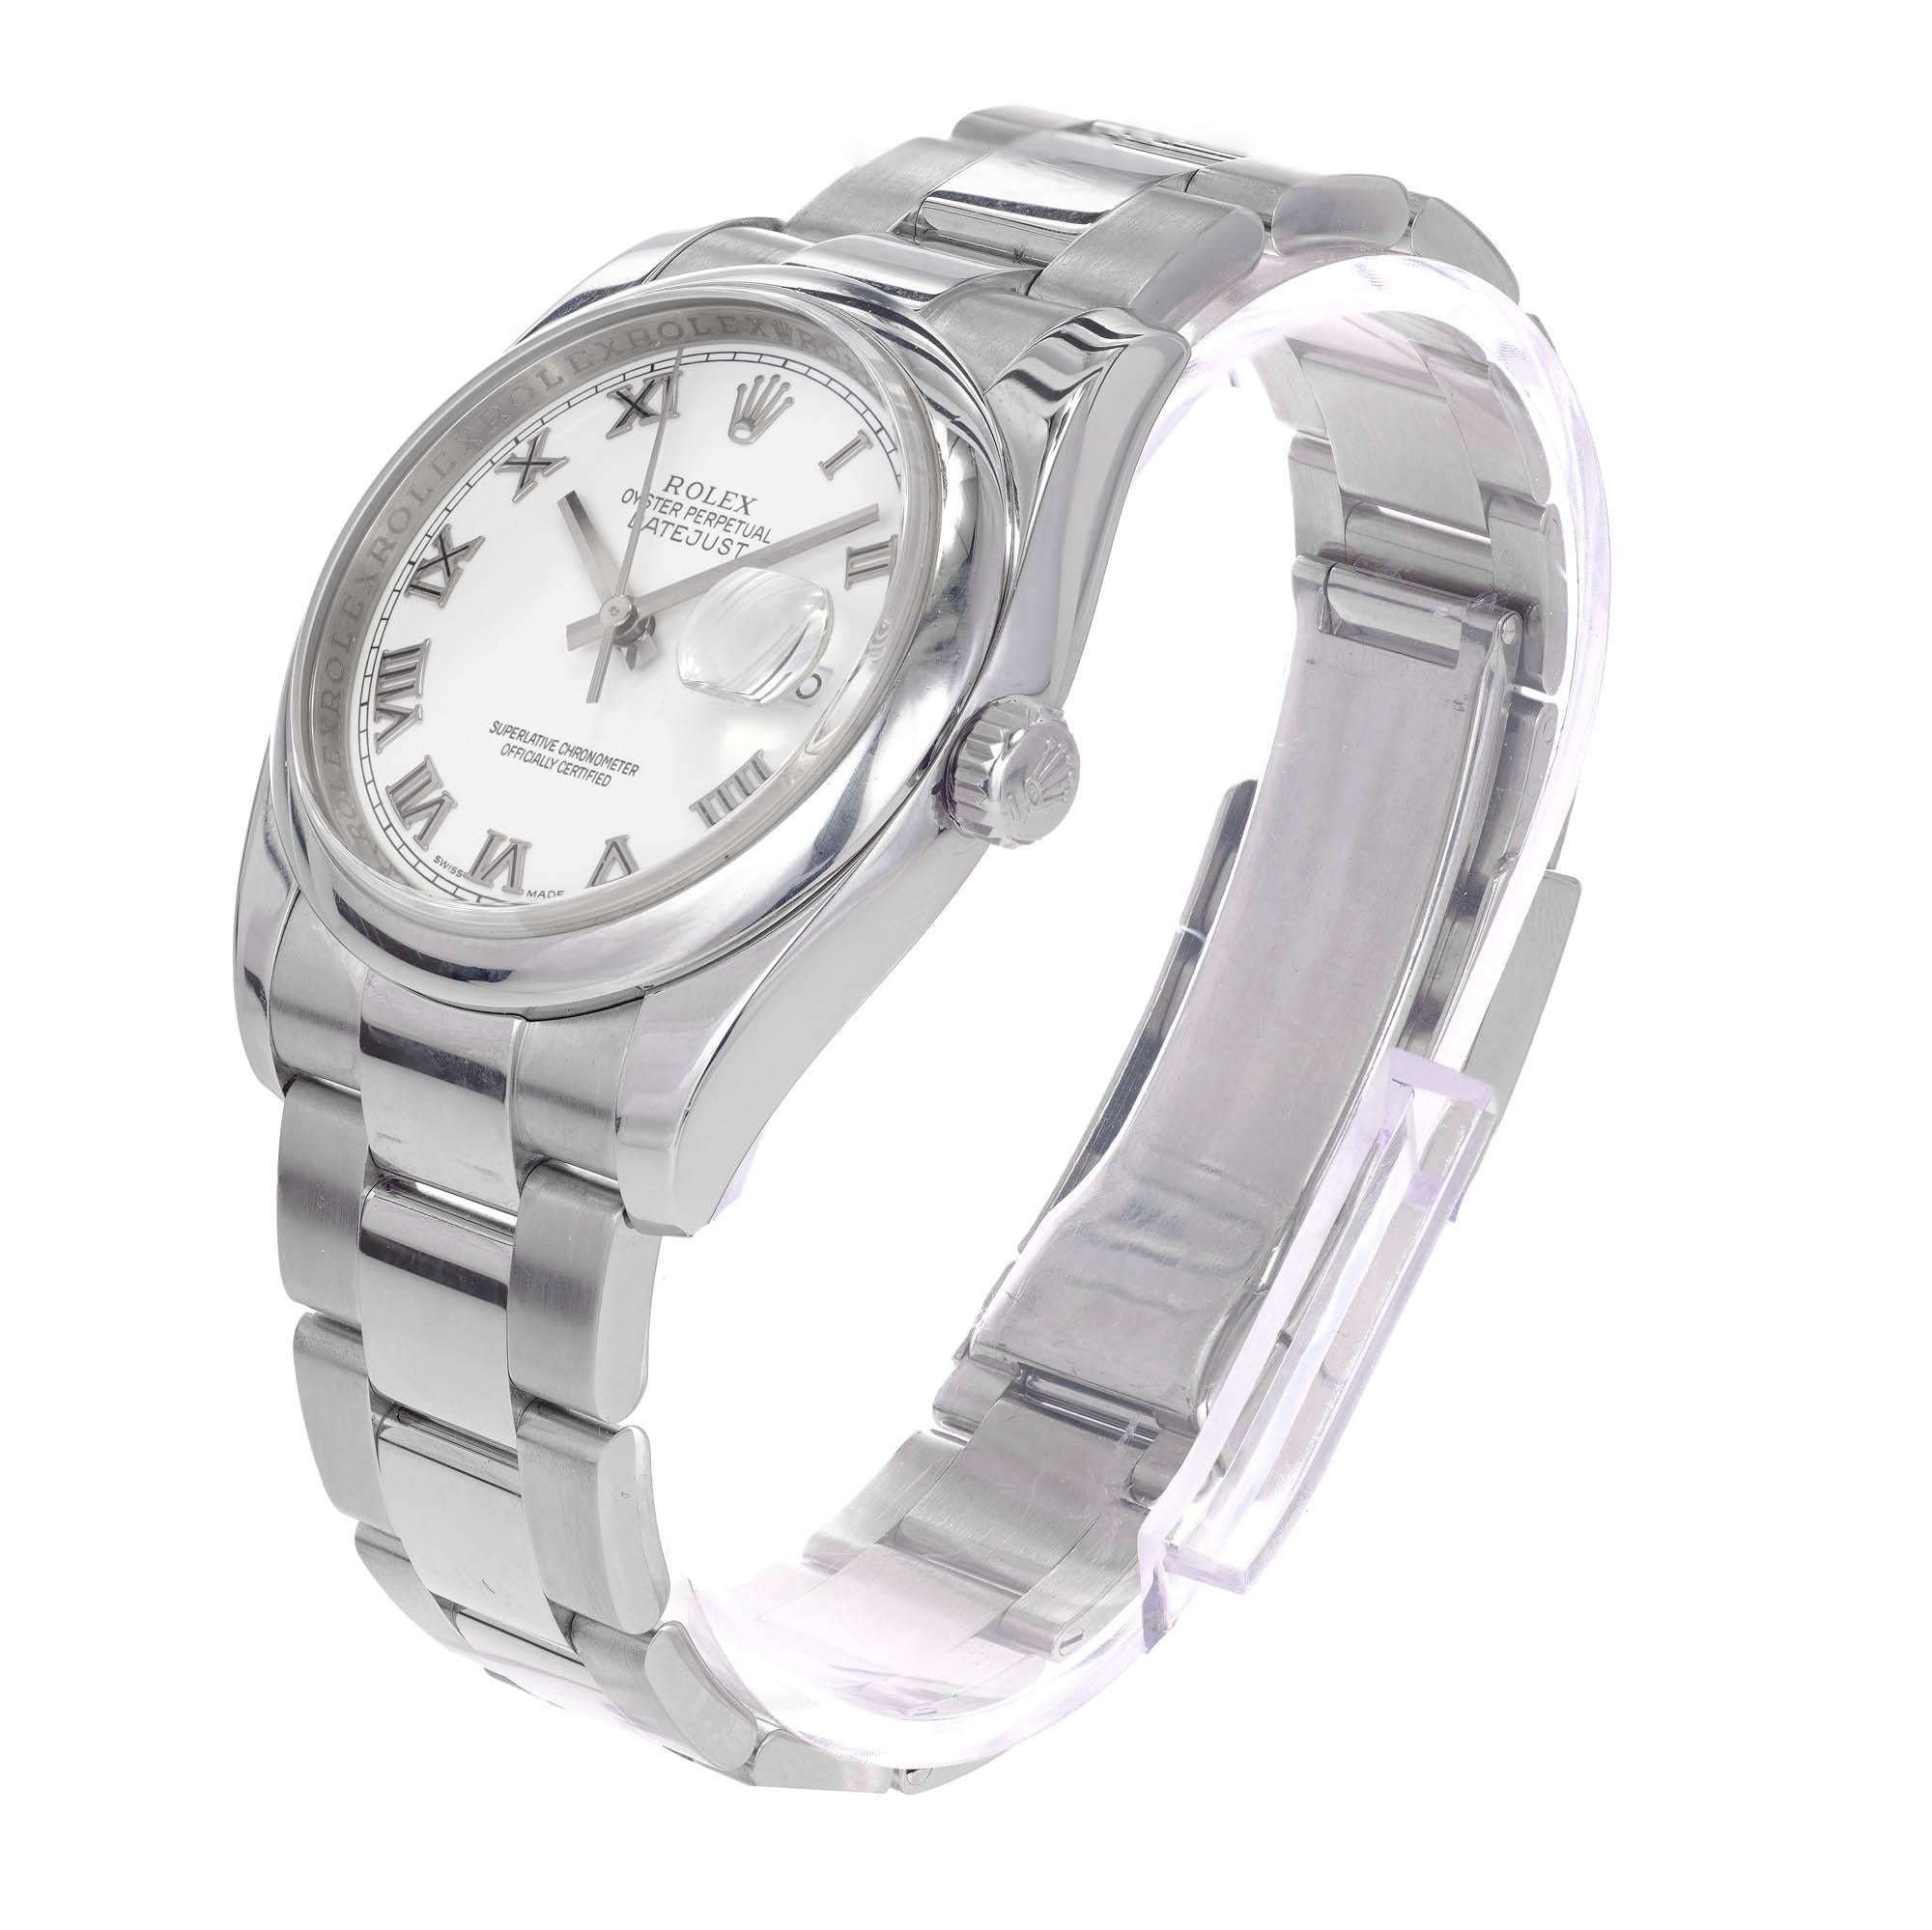 Men's stainless steel date just Rolex wristwatch with white dial and Roman numerals.

Case Dimensions: 36mm
Length: 8 inches
Band Width at Case: 9.5mm
Band: Stainless Steel Oyster
Crystal: sapphire
Dial: white and Roman numerals
Inside Case: Inner